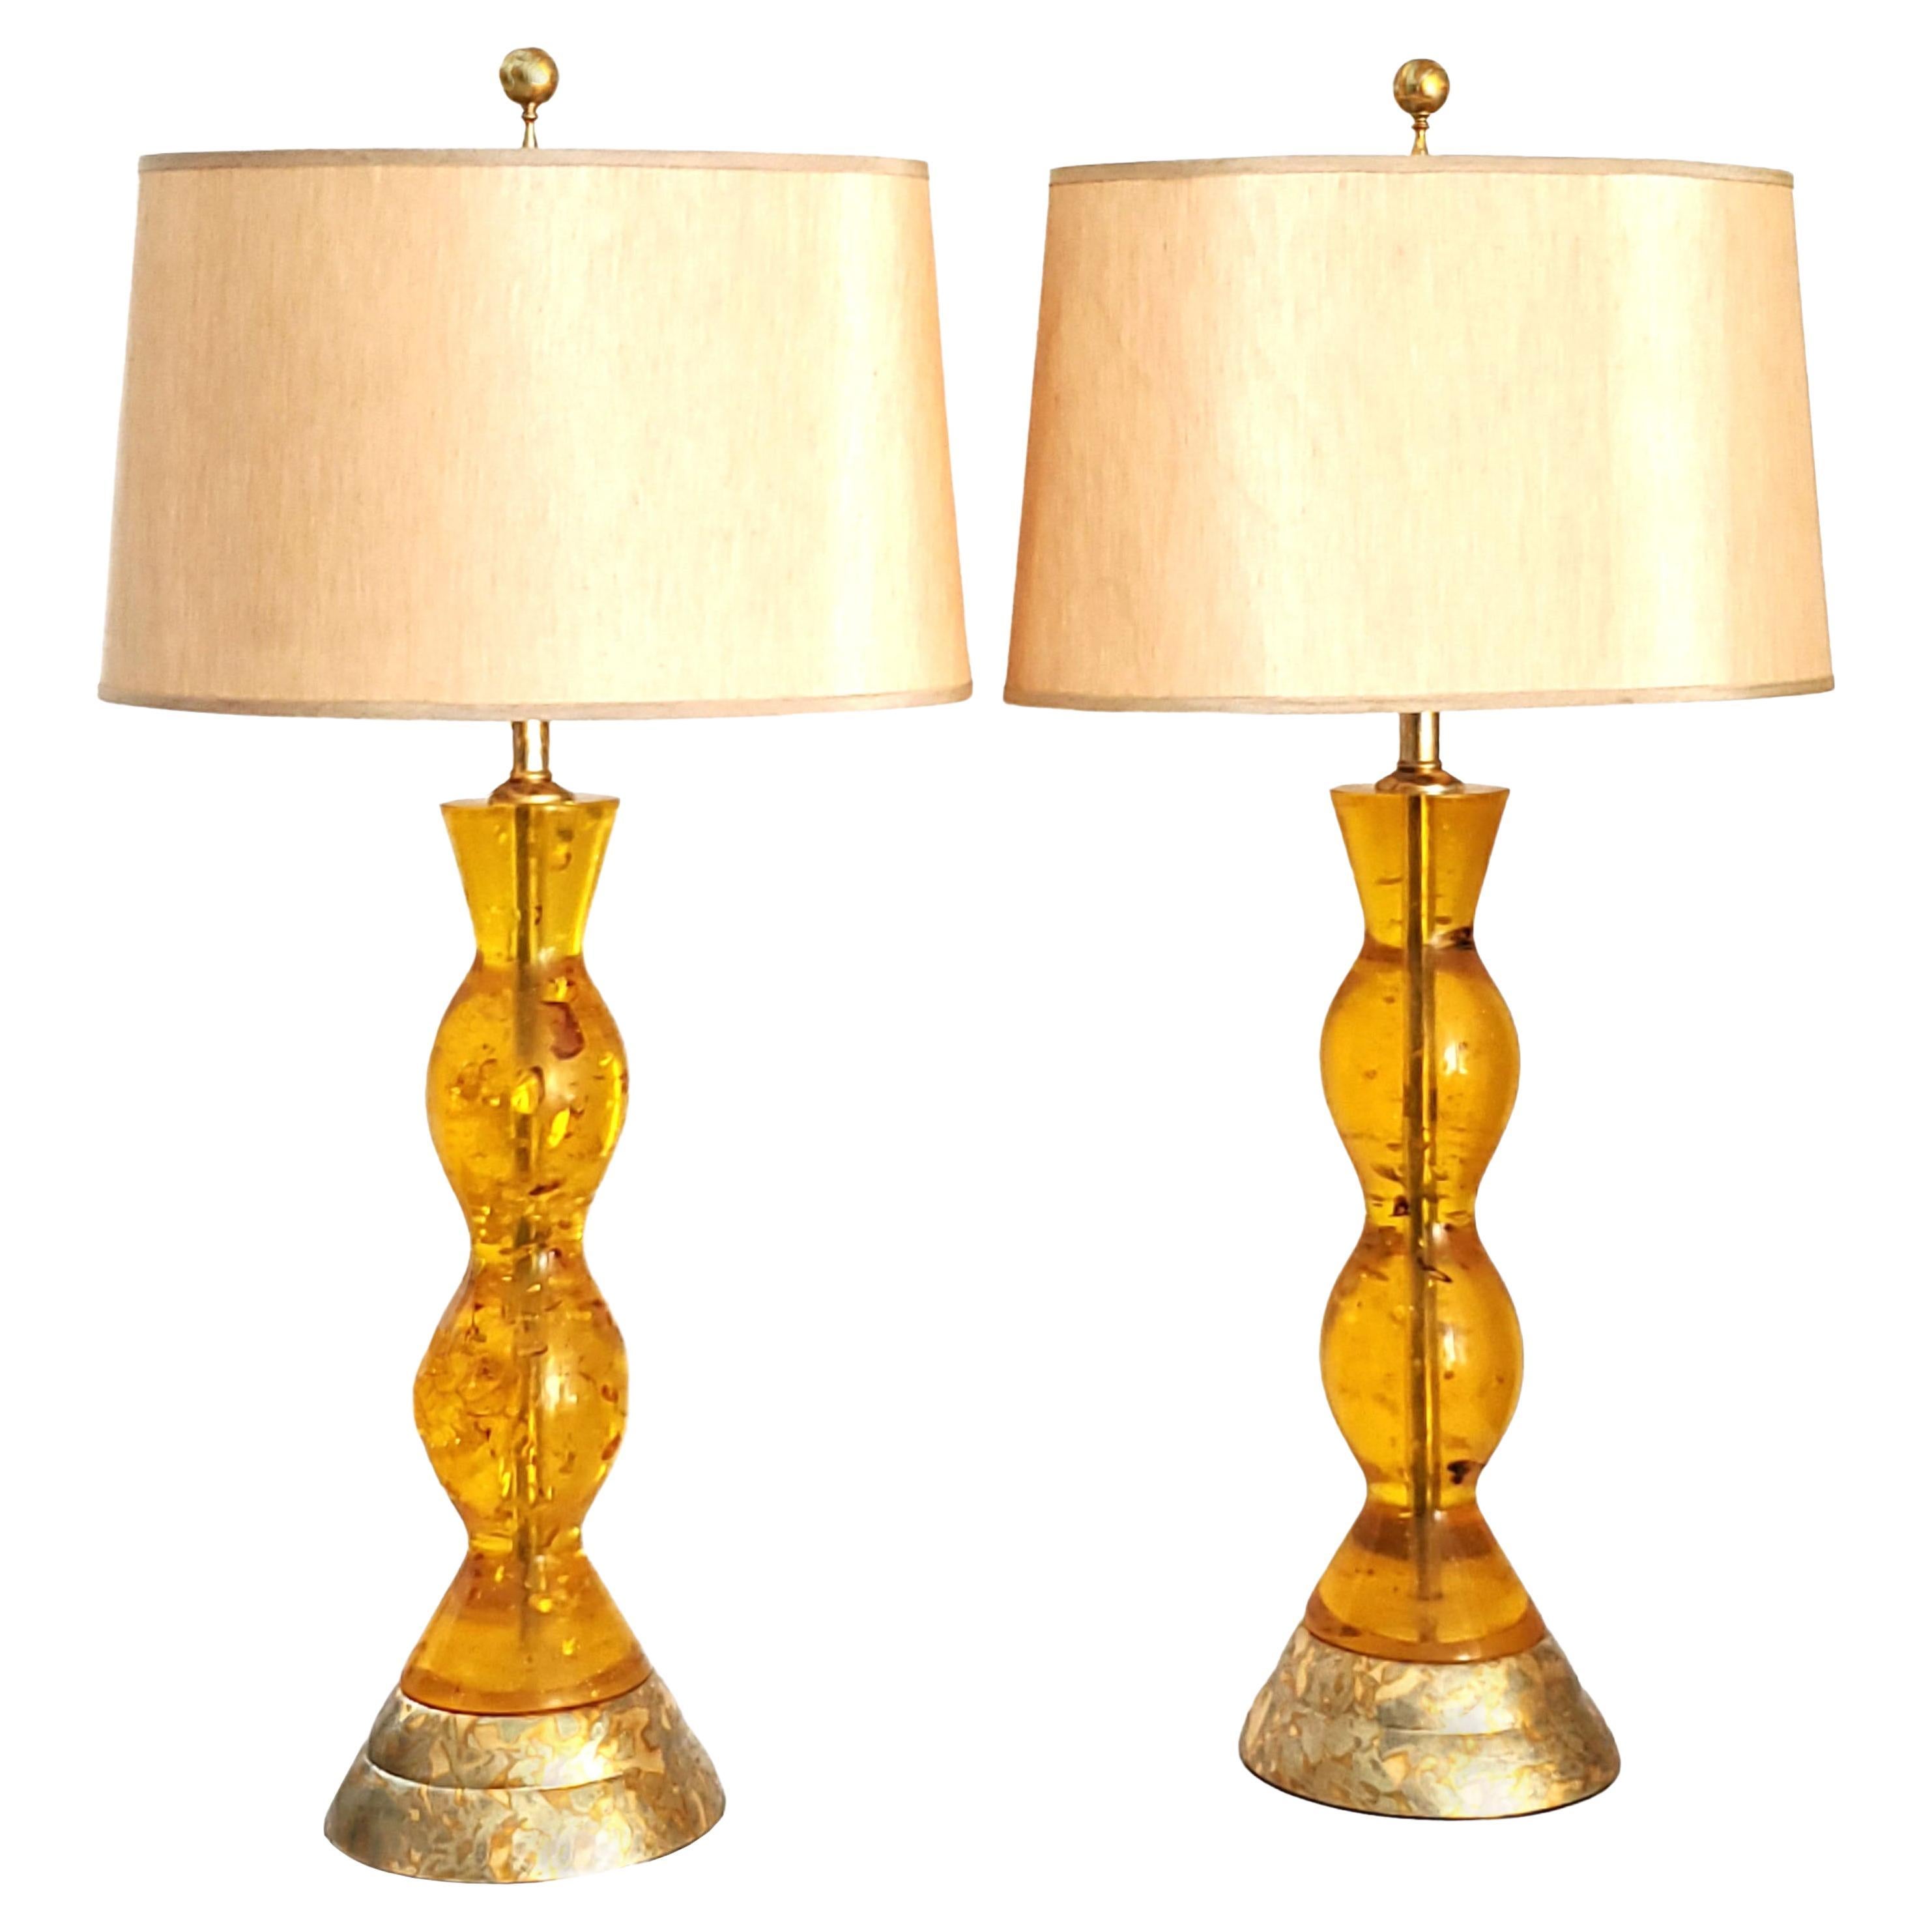 Pierre Giraudon Style Vintage Amber Colored Lucite Table Lamps & Gold Leaf Bases